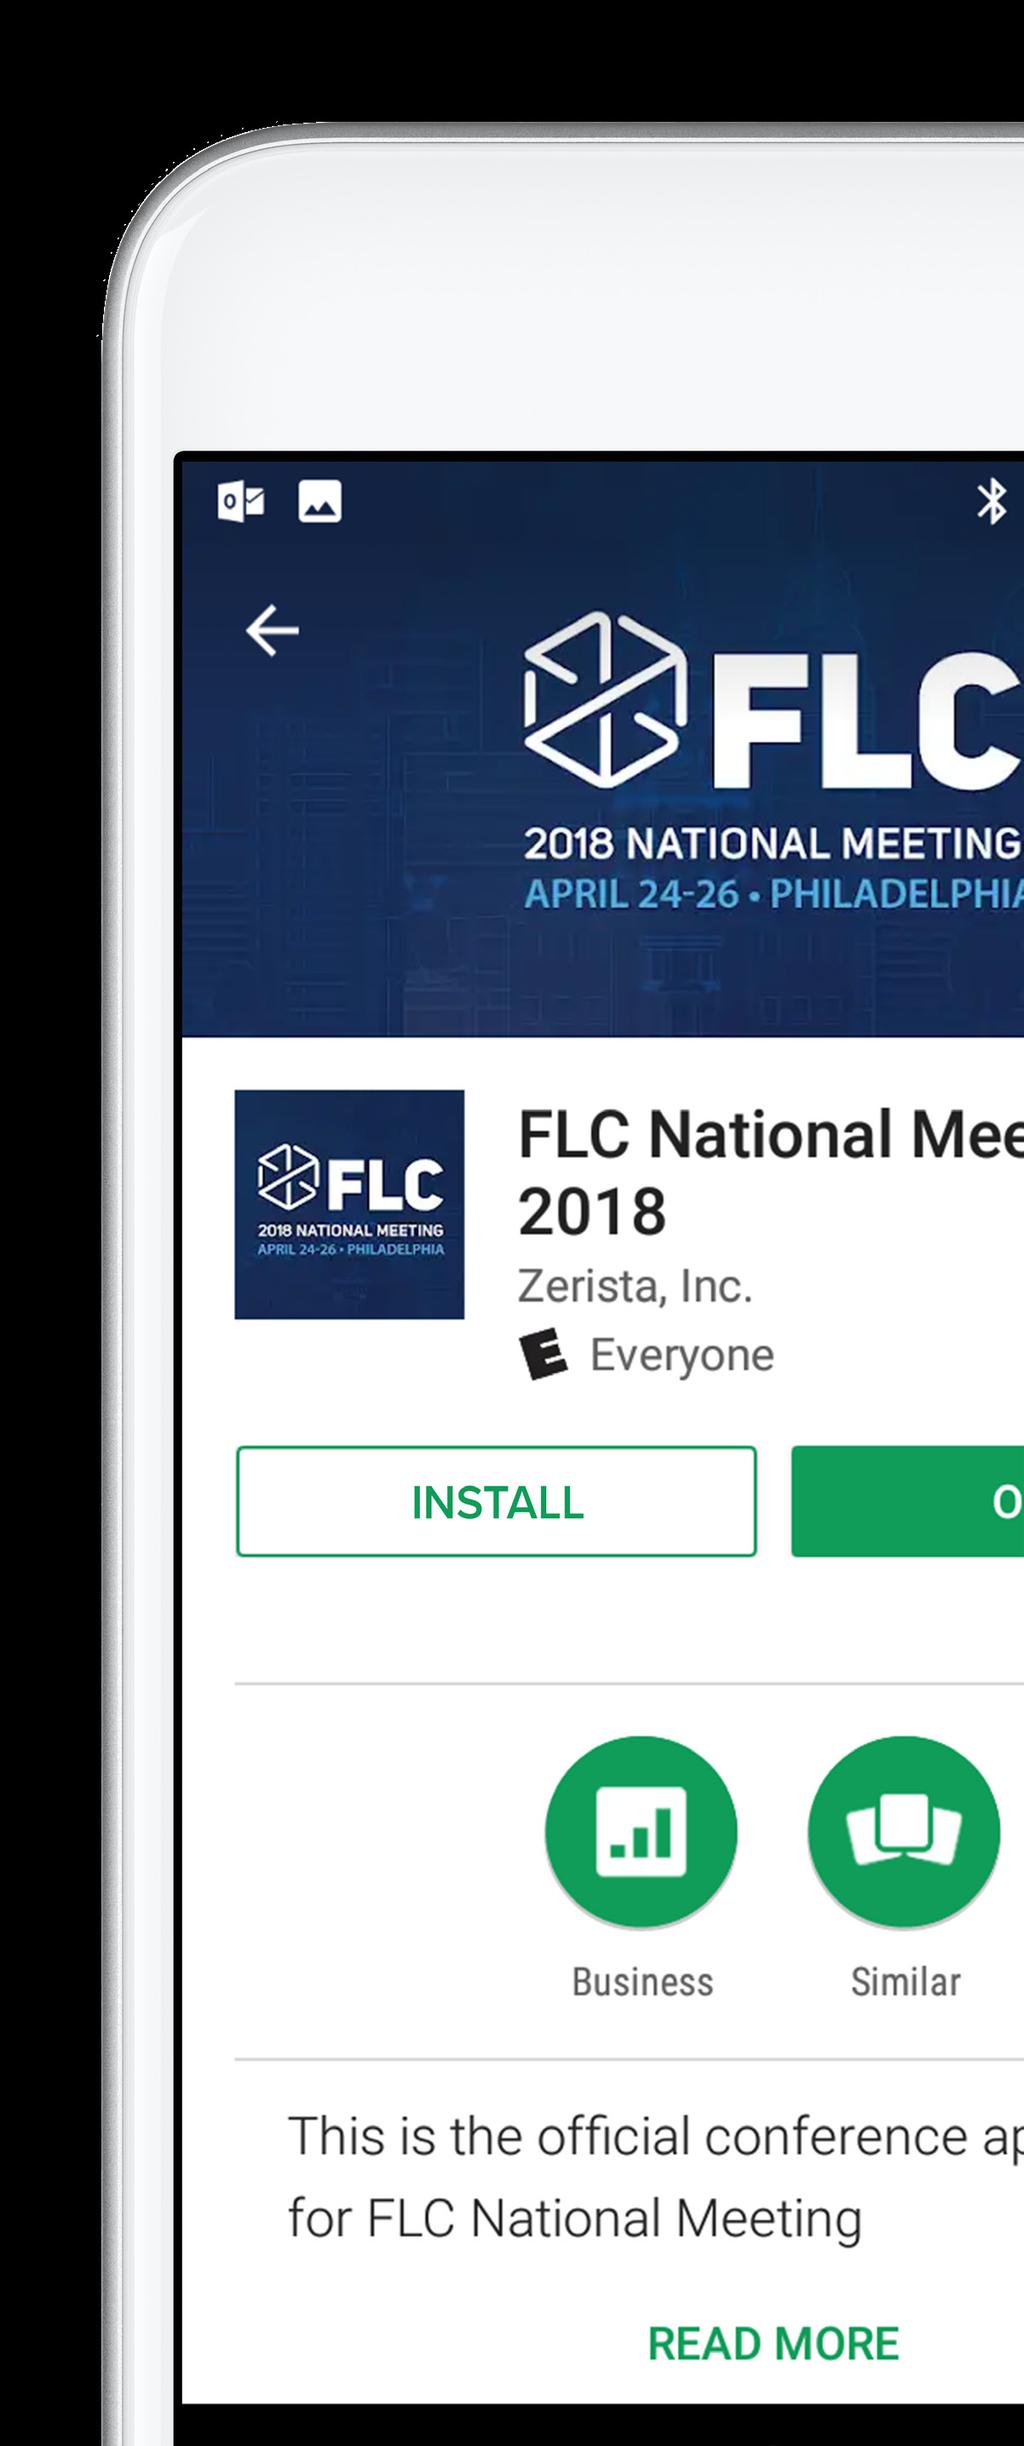 AVAILABLE ON ALL PLATFORMS To download the FREE meeting mobile app, search FLC national